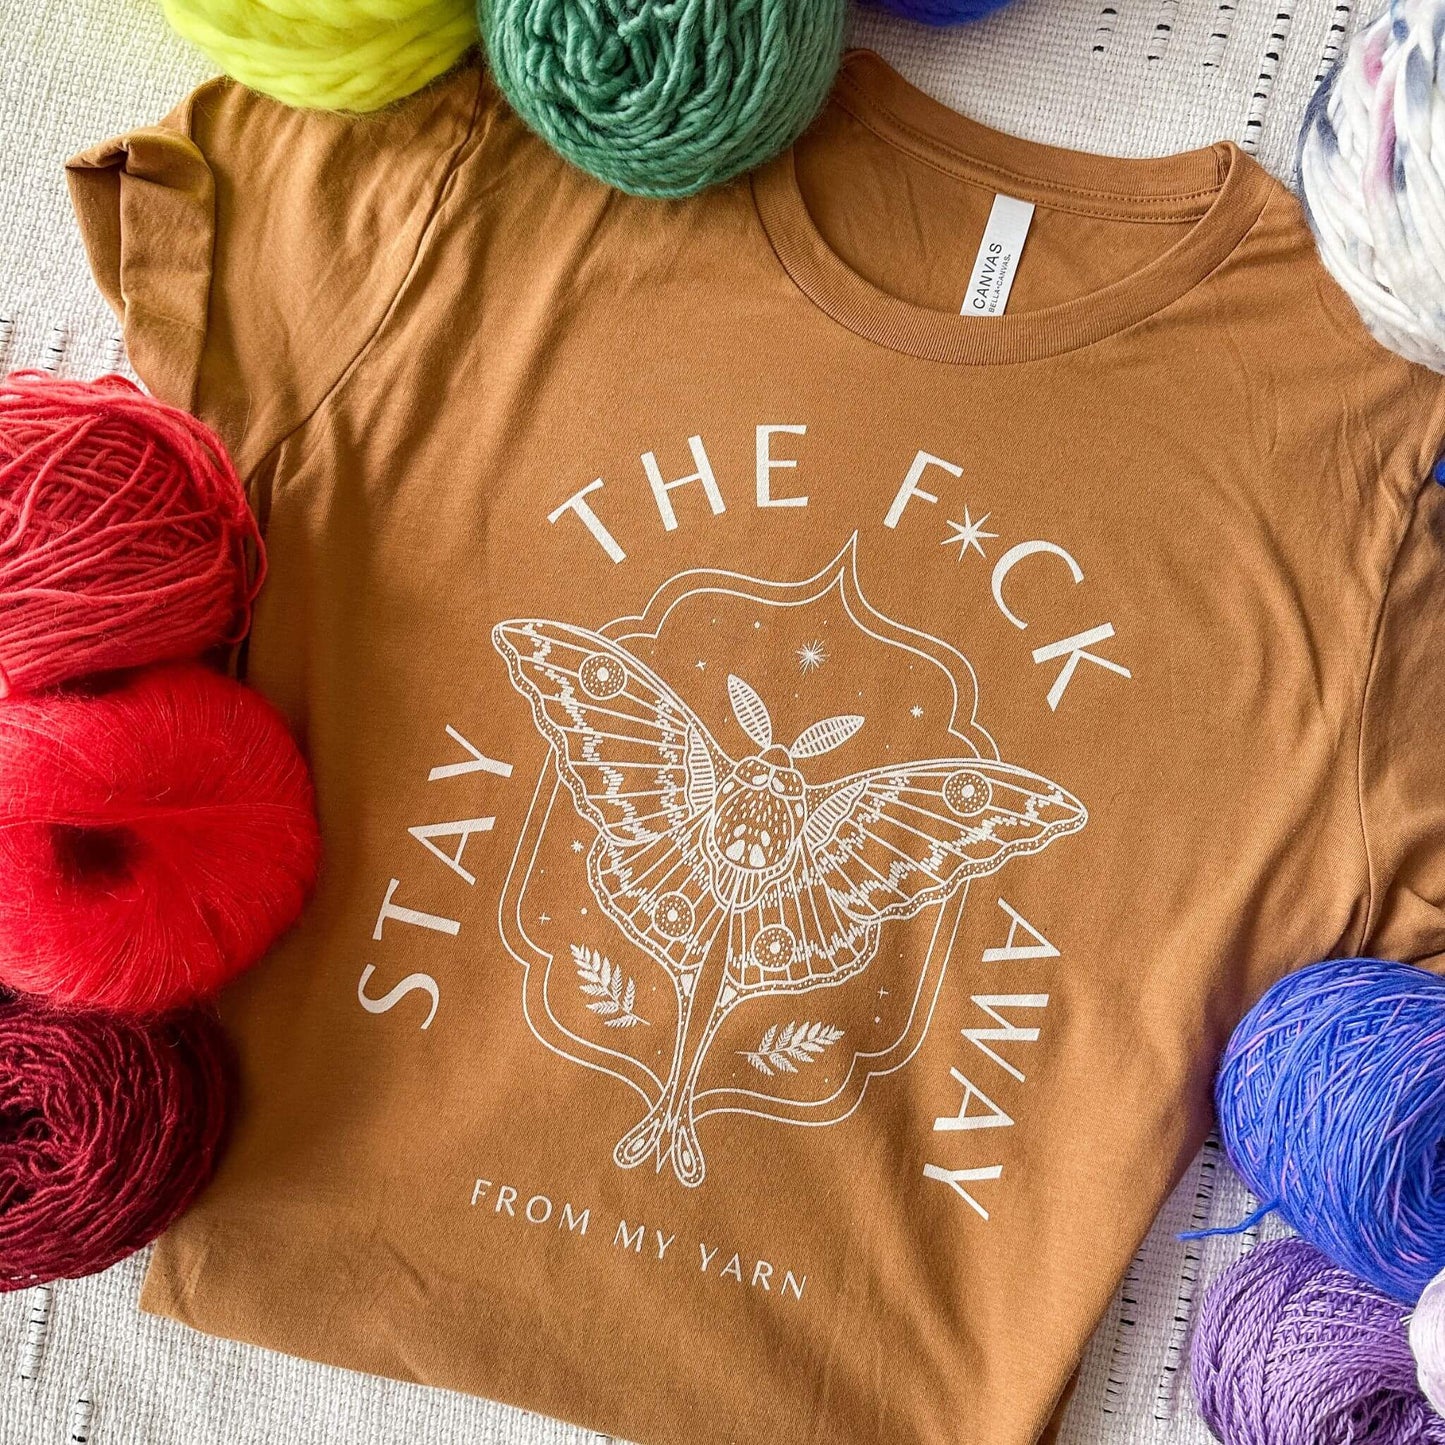 Stay the F*ck Away From My Yarn T-Shirt